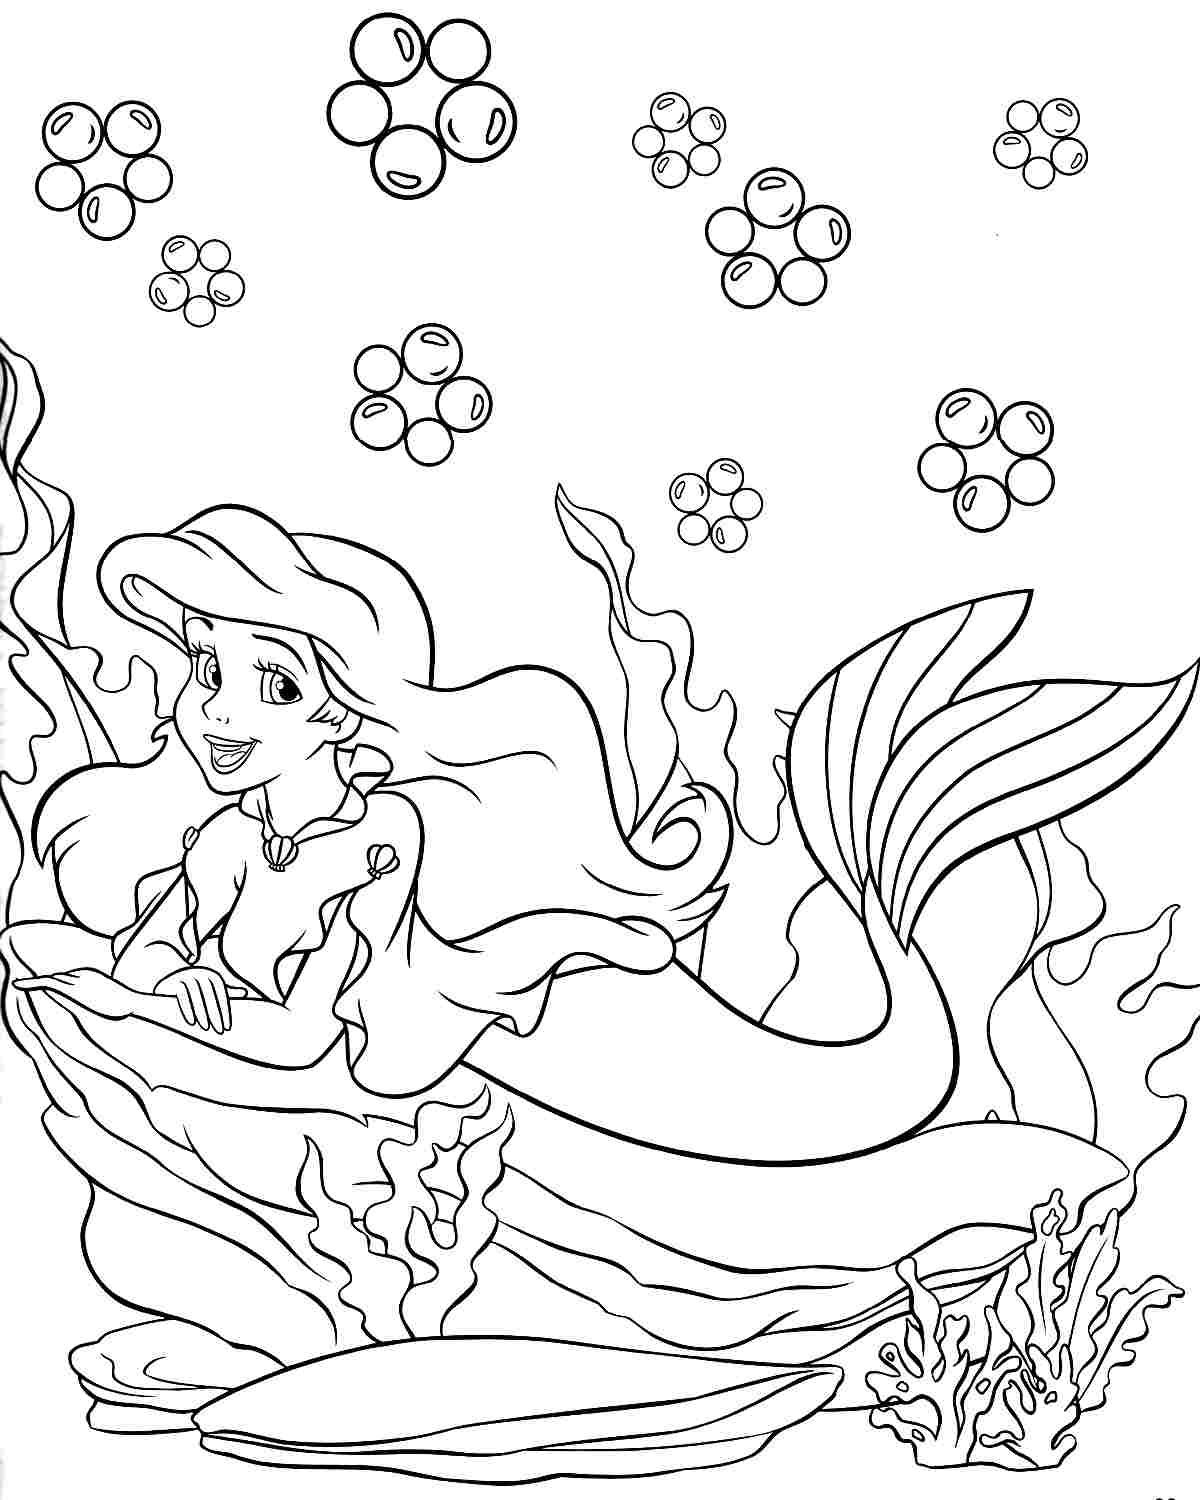 Disney Princess Winter Coloring Pages   Coloring Online   Coloring ...